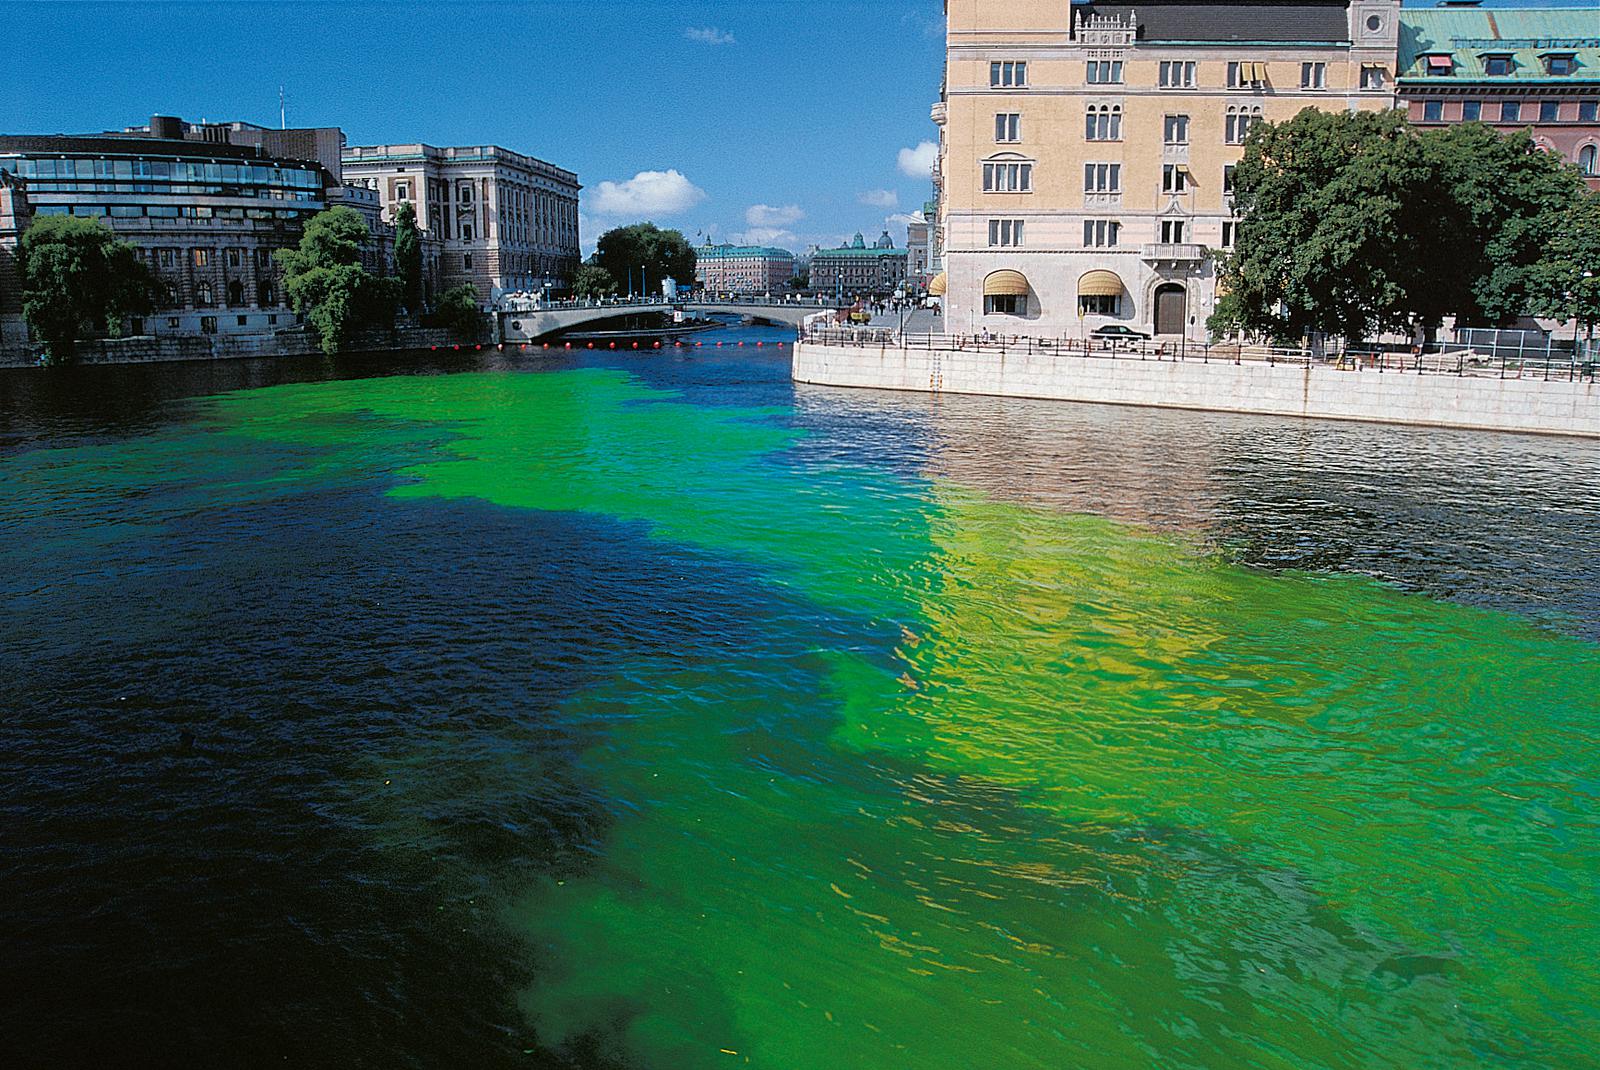 Green River Project, 2000, by Olafur Eliasson, uranine and water, dimensions variableStrömmen waterway, Stockholm. As reproduced in Chromaphilia